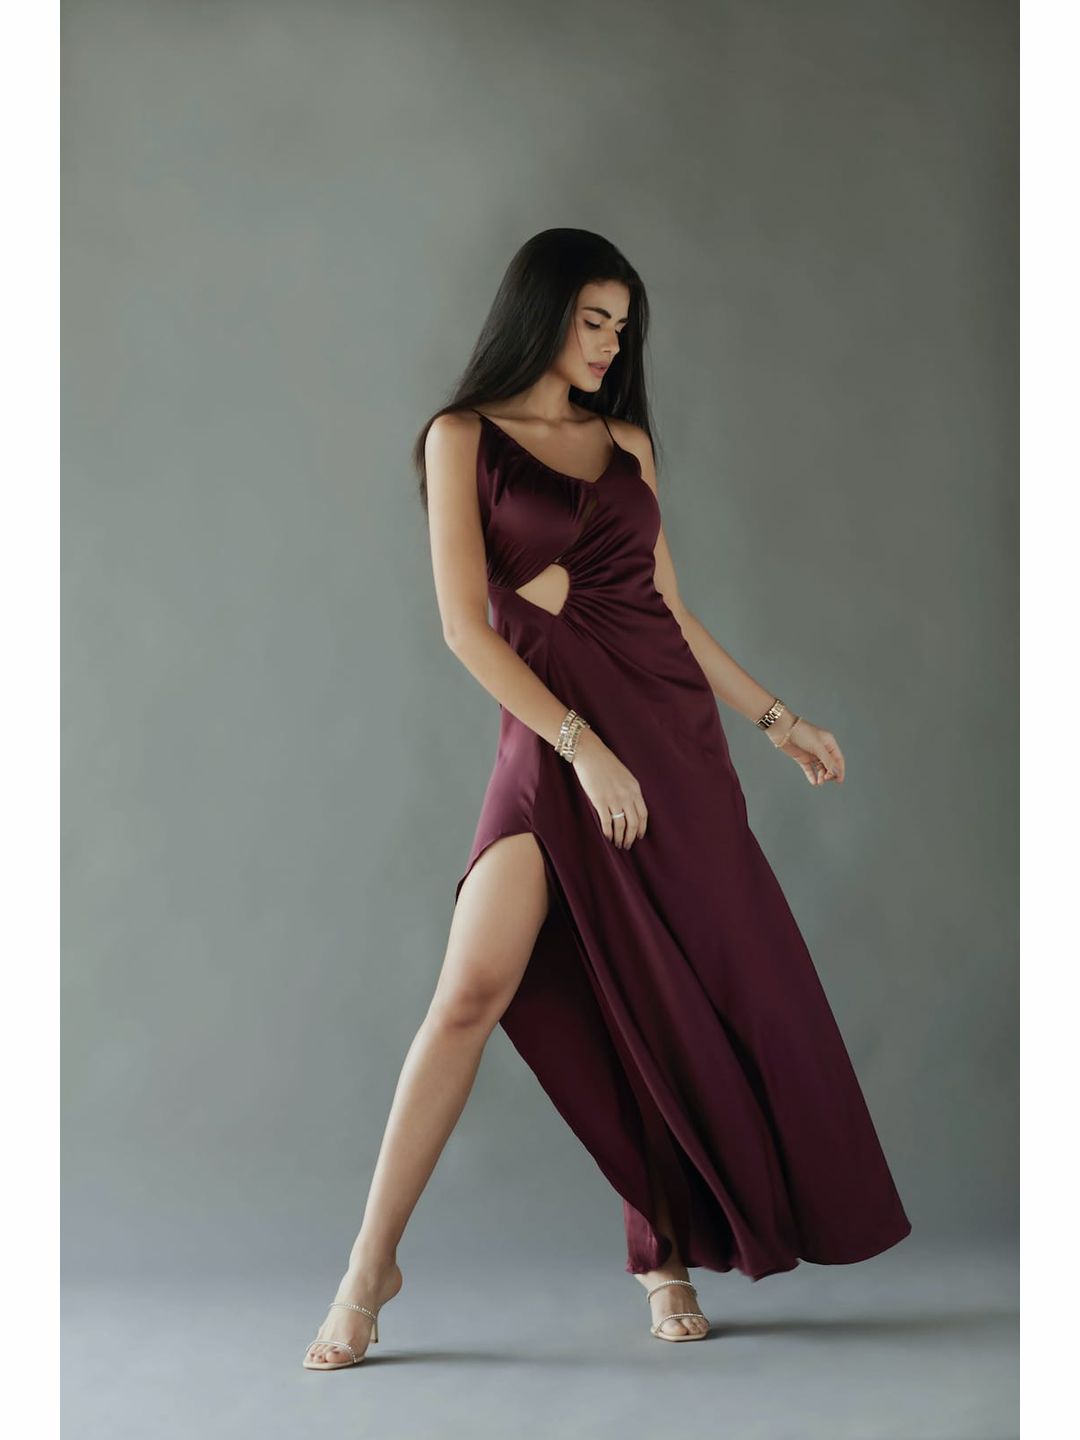 The Collette Resort Cocktail Gowns - Reema Anand Label